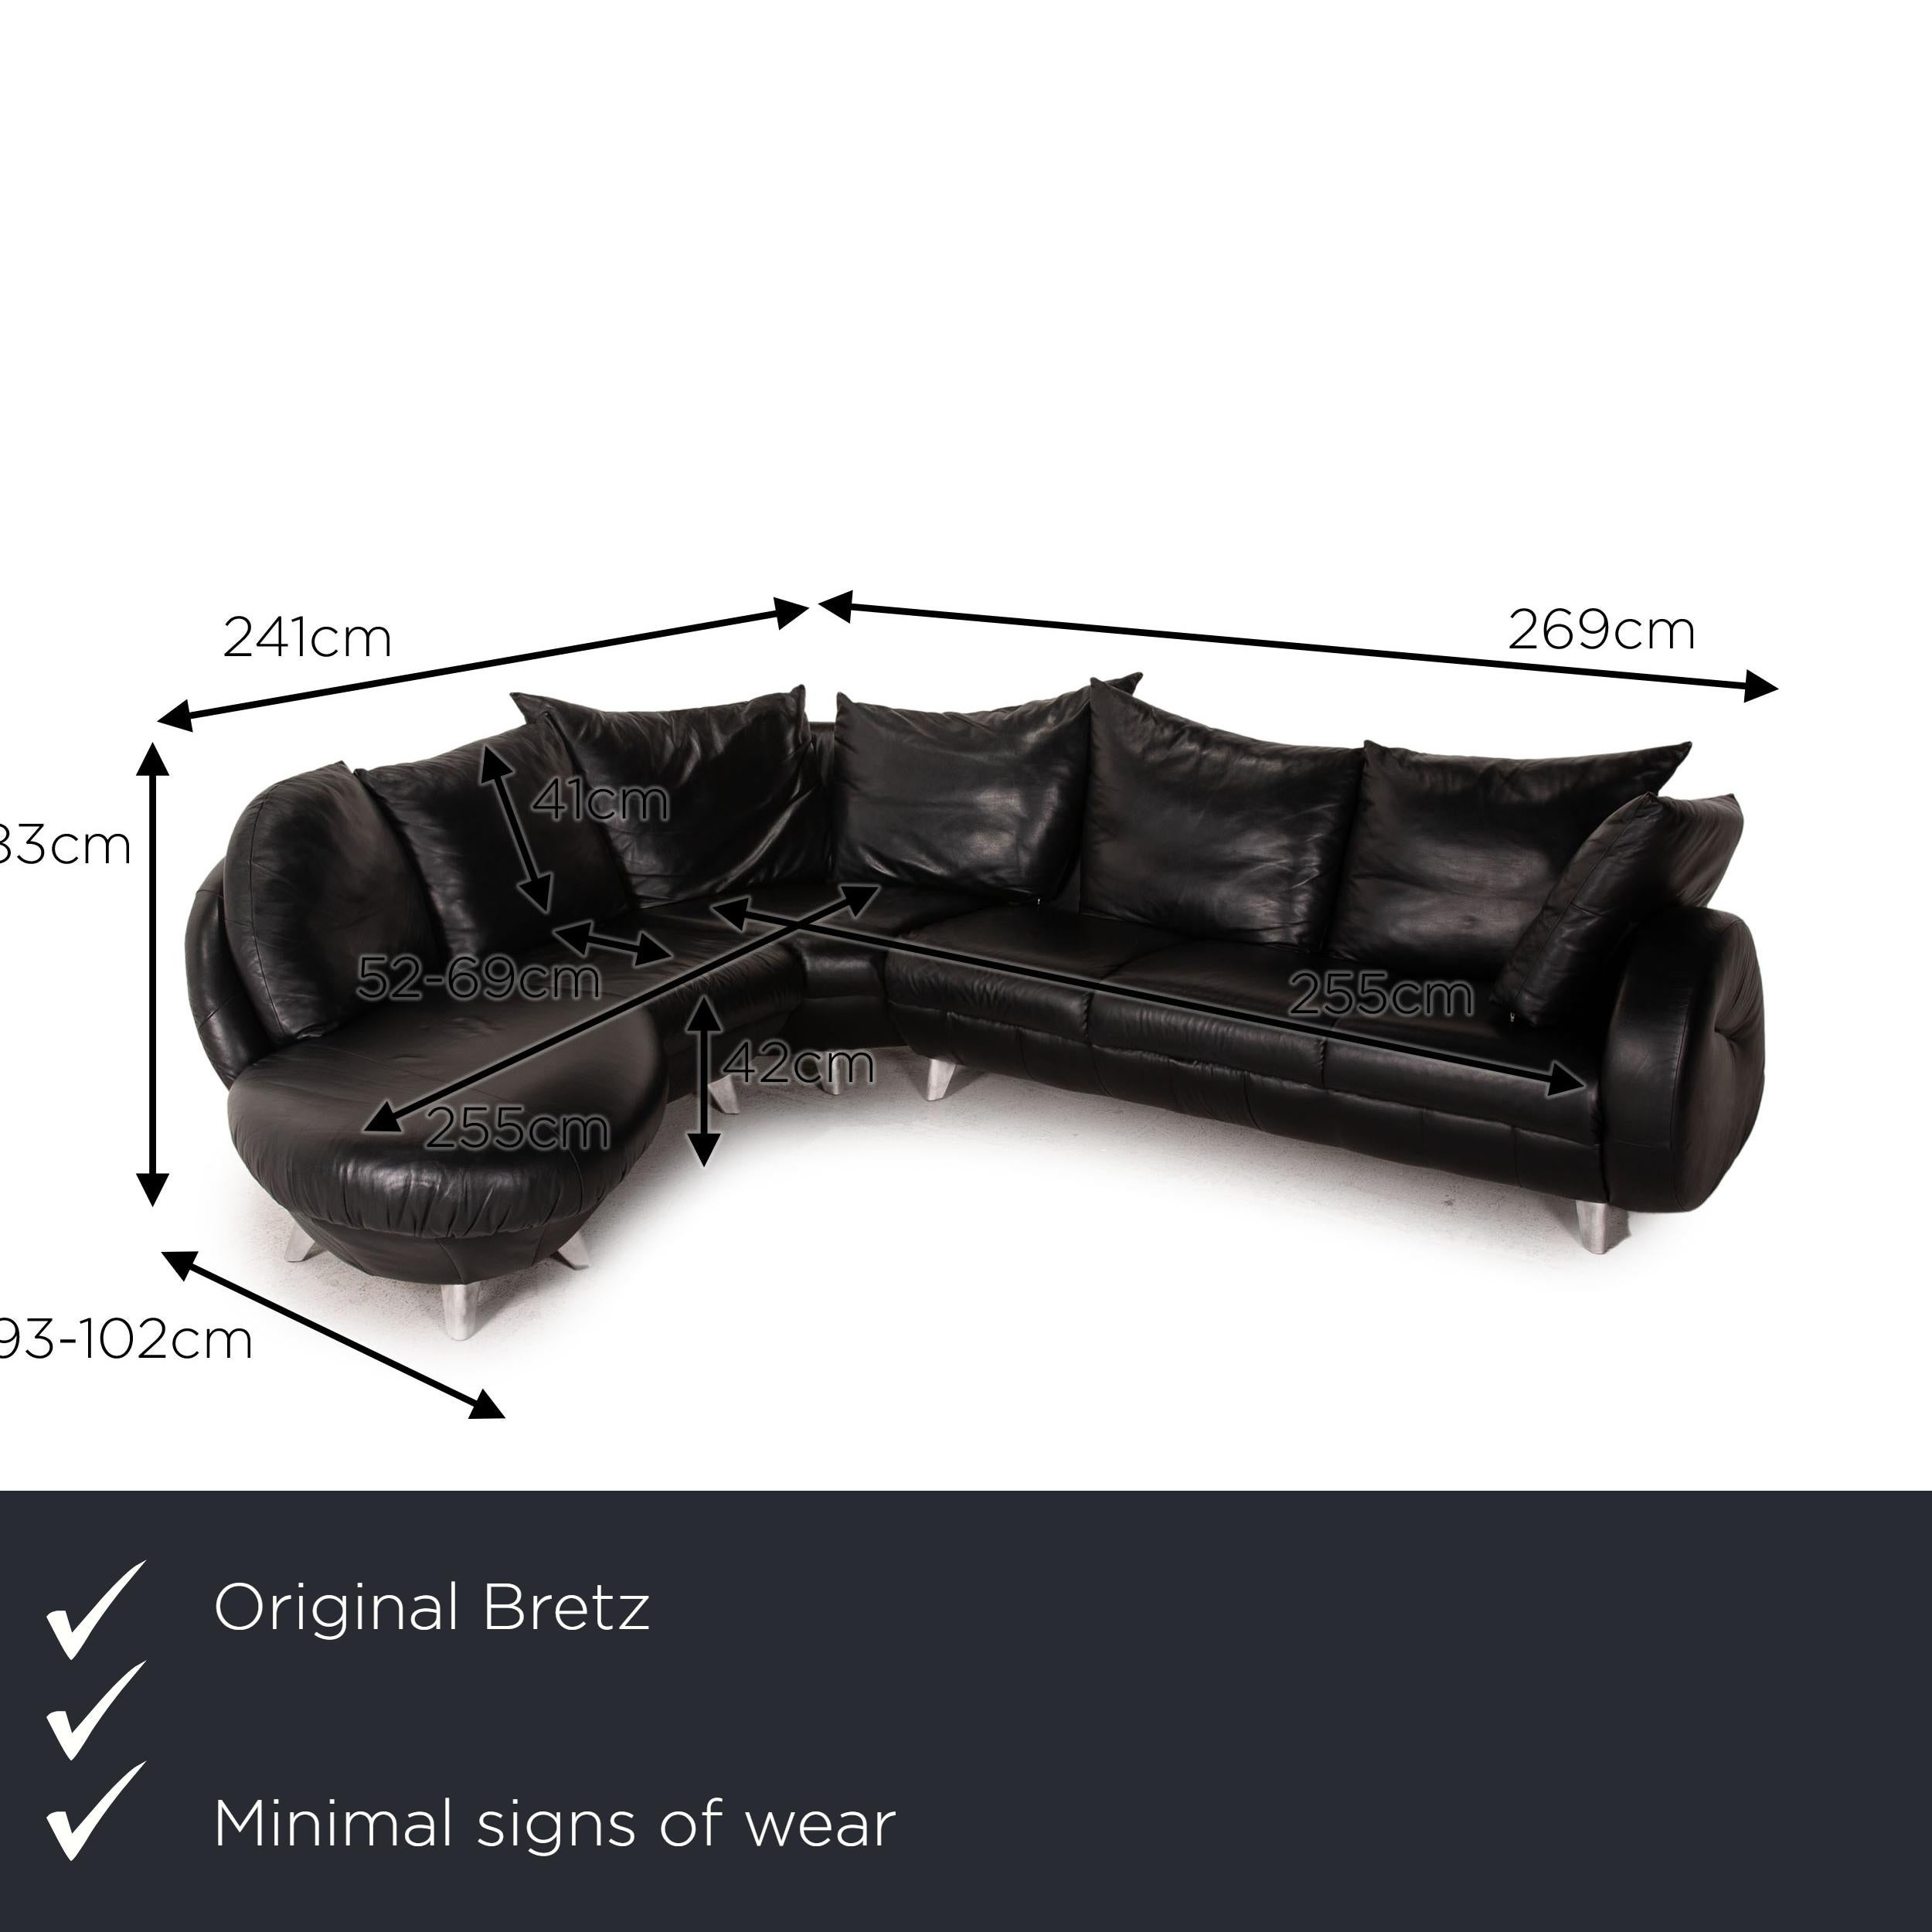 We present to you a Bretz popeye leather sofa black corner sofa couch.
  
 

 Product measurements in centimeters:
 

 depth: 93
 width: 269
 height: 83
 seat height: 42
 rest height: 83
 seat depth: 52
 seat width: 255
 back height: